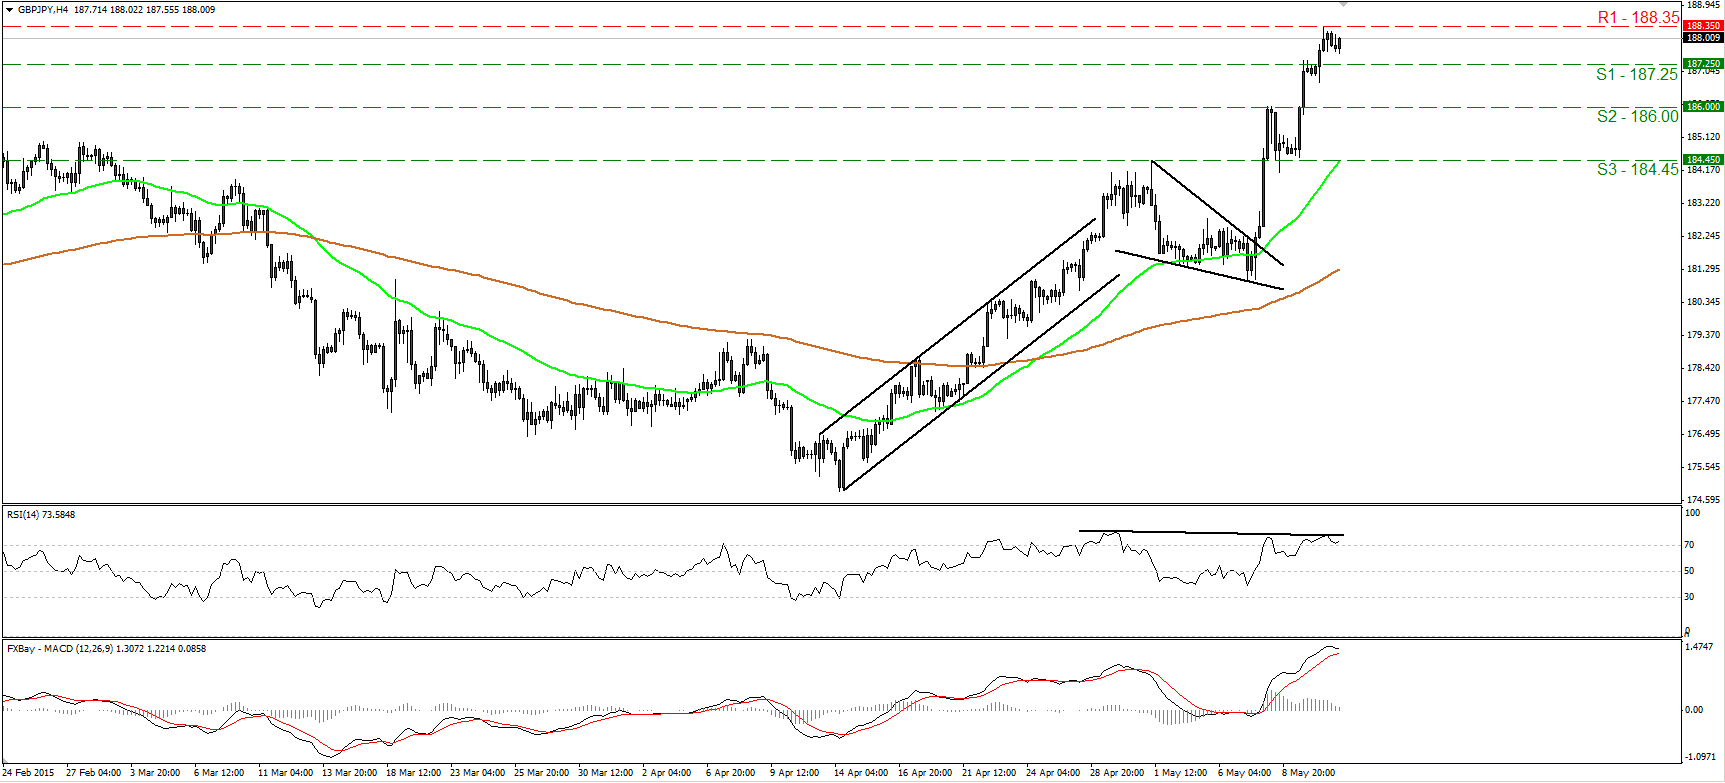 GBP/JPY 4 Hour Chart February 24th-May 8th